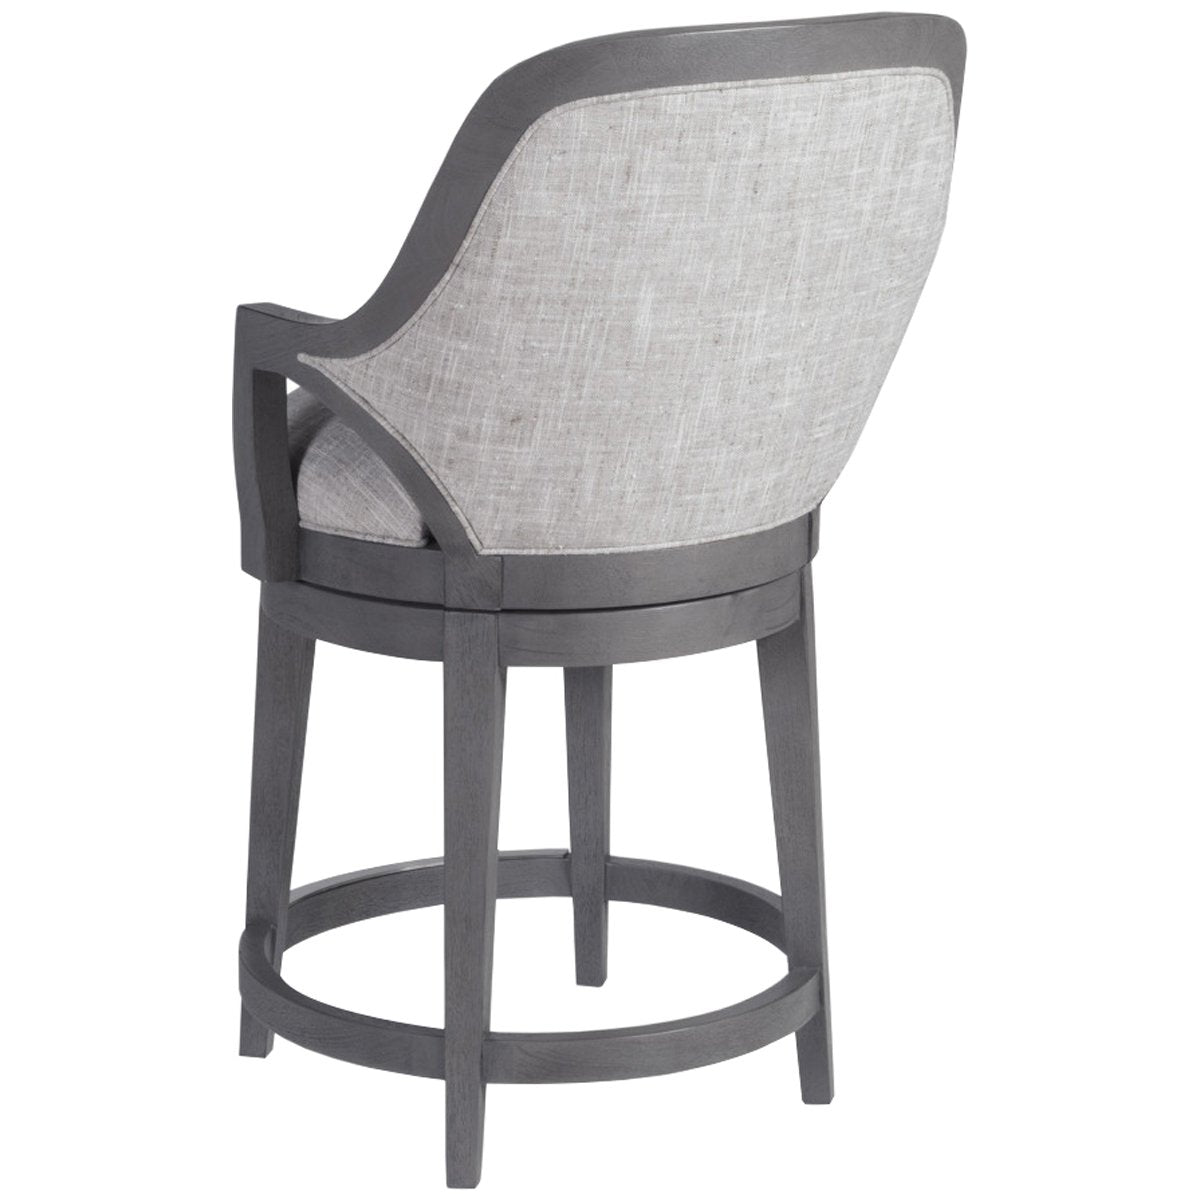 Artistica Home Appellation Swivel Counter Stool 2200-895-01